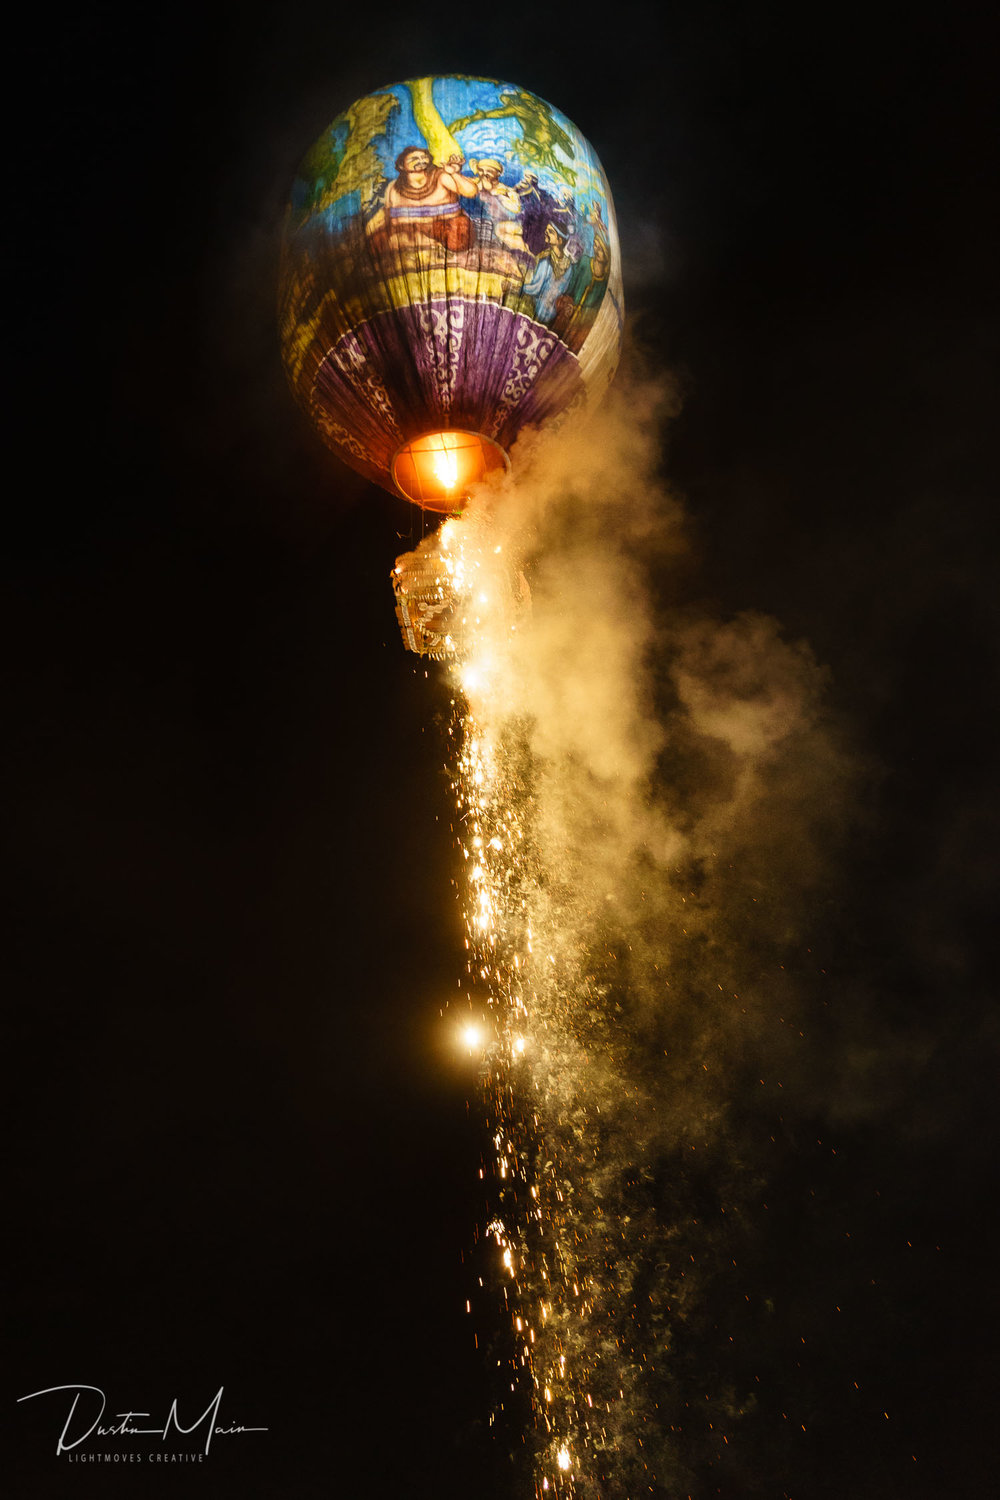  The fireworks on a fire balloon in Myanmar begin to go off.  © Dustin Main 2015 